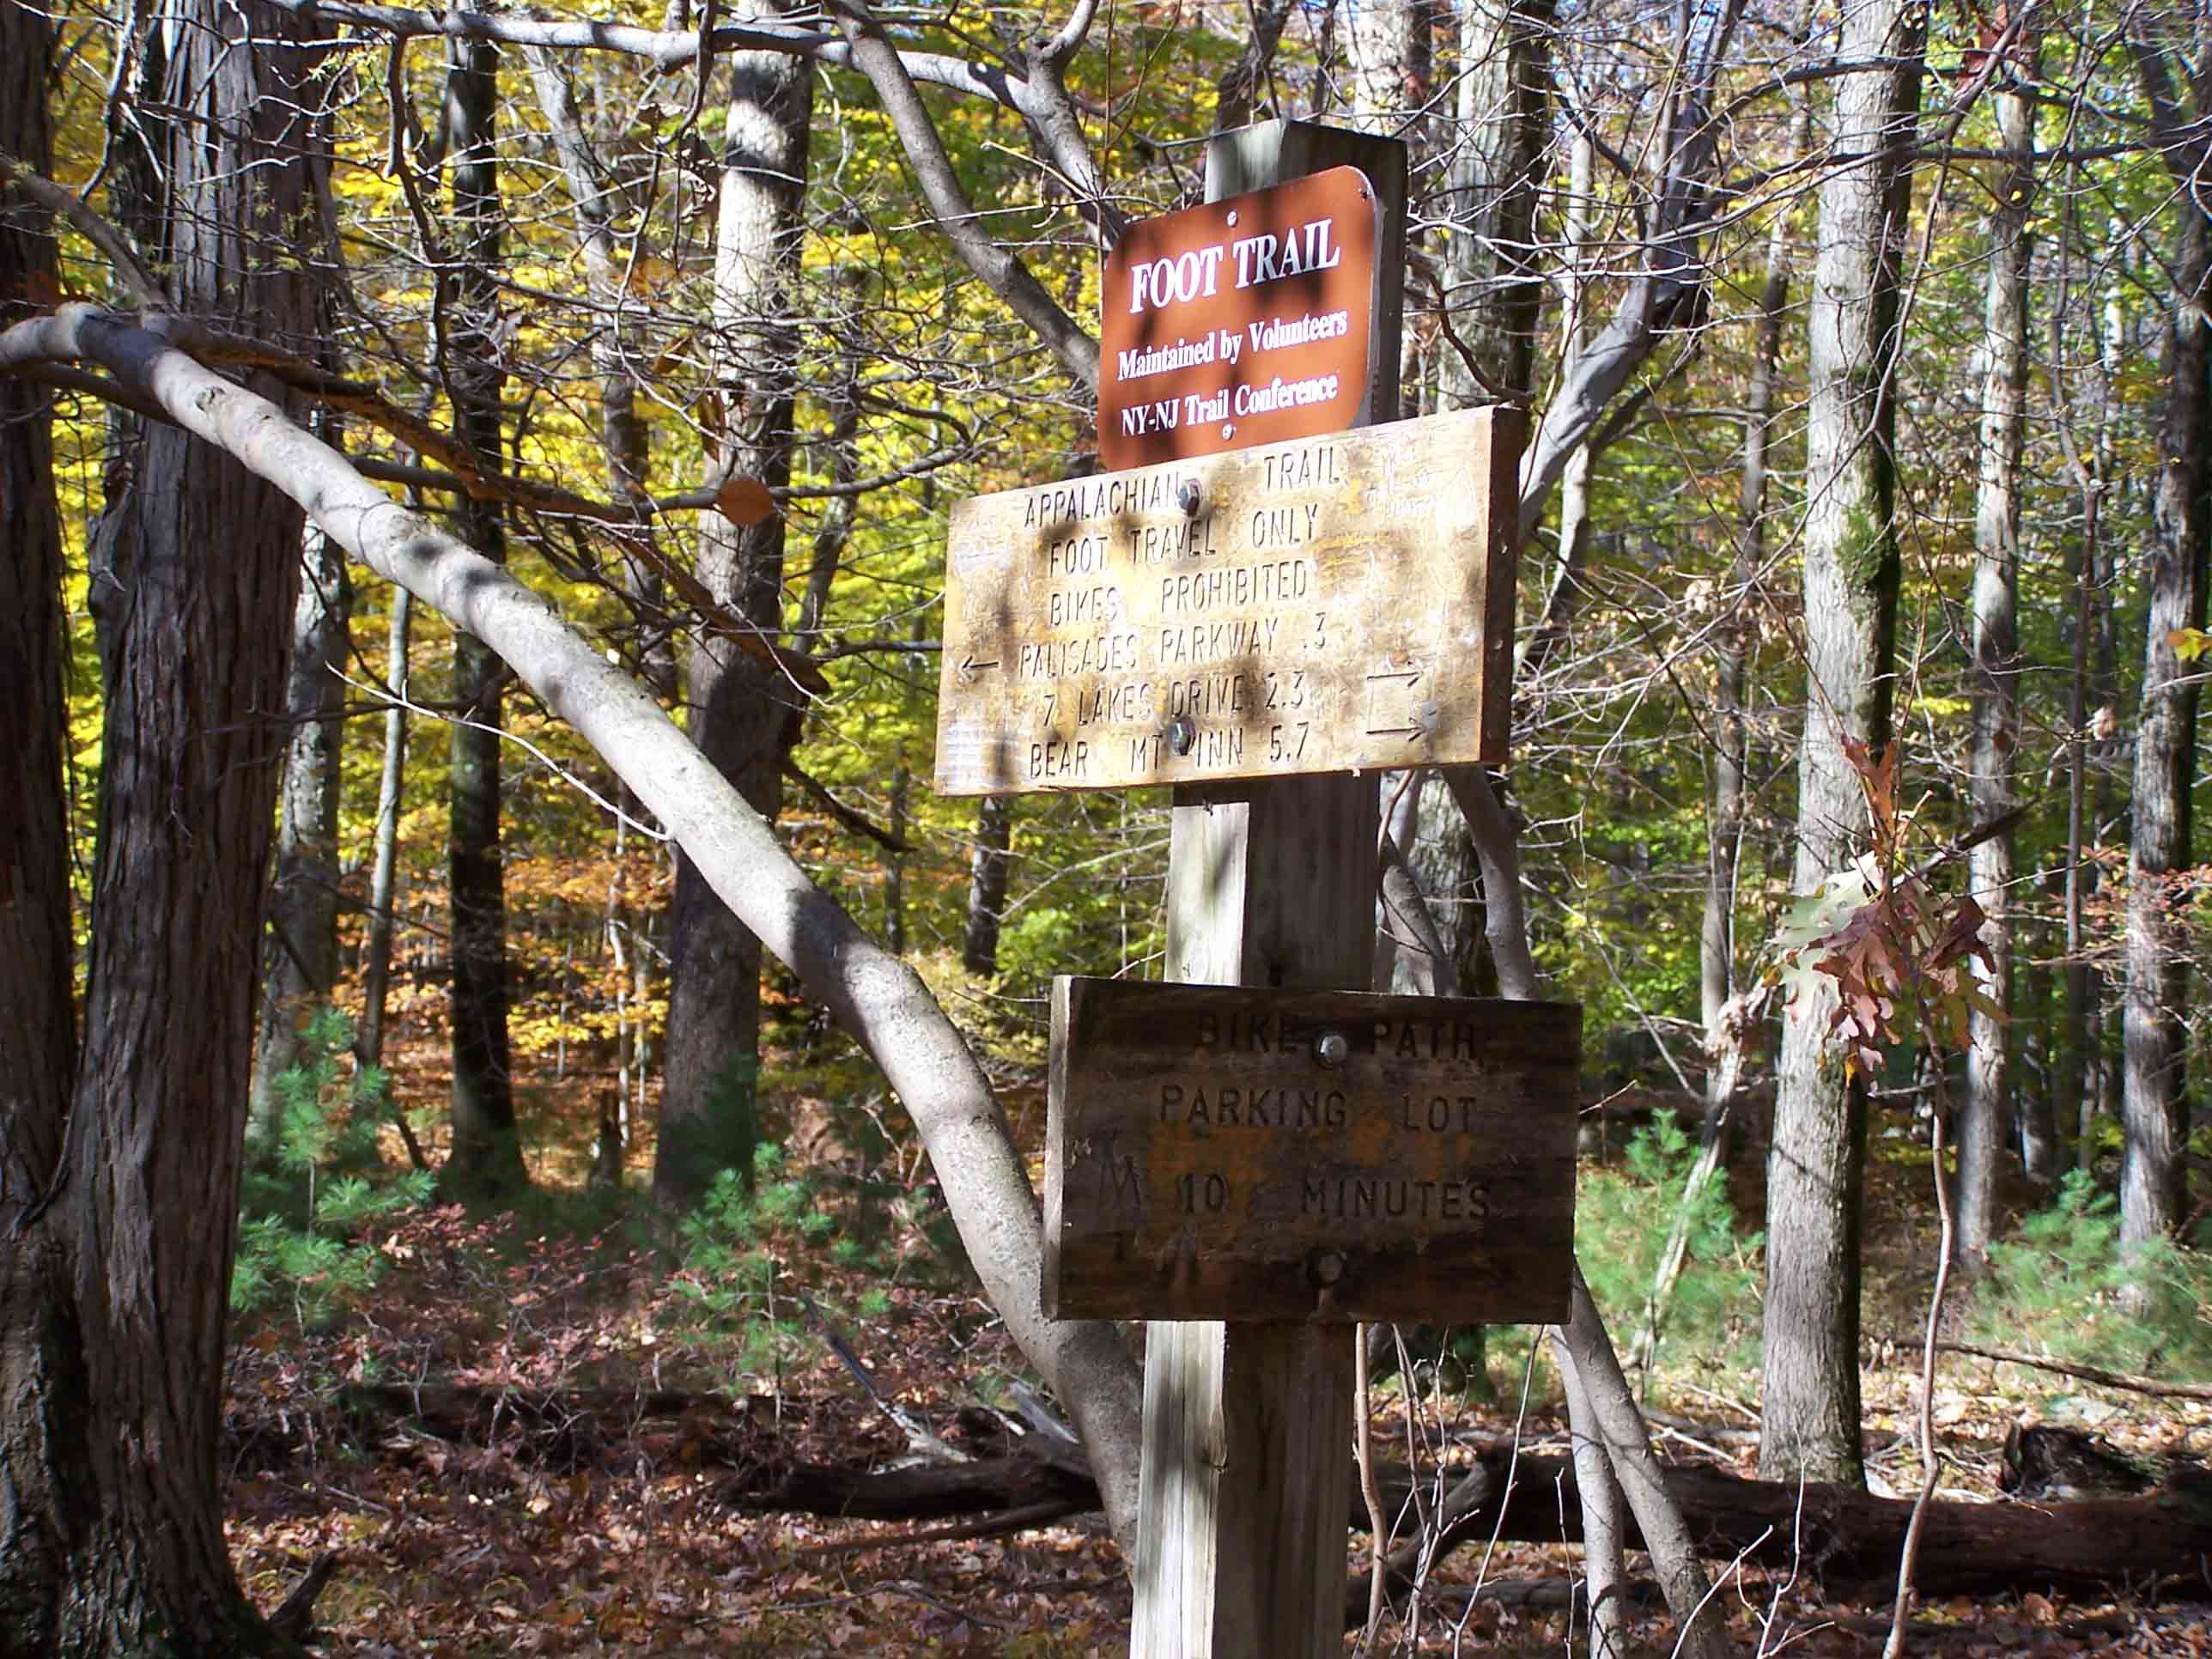 mm 7.3 Trail sign. Courtesy at@rohland.org